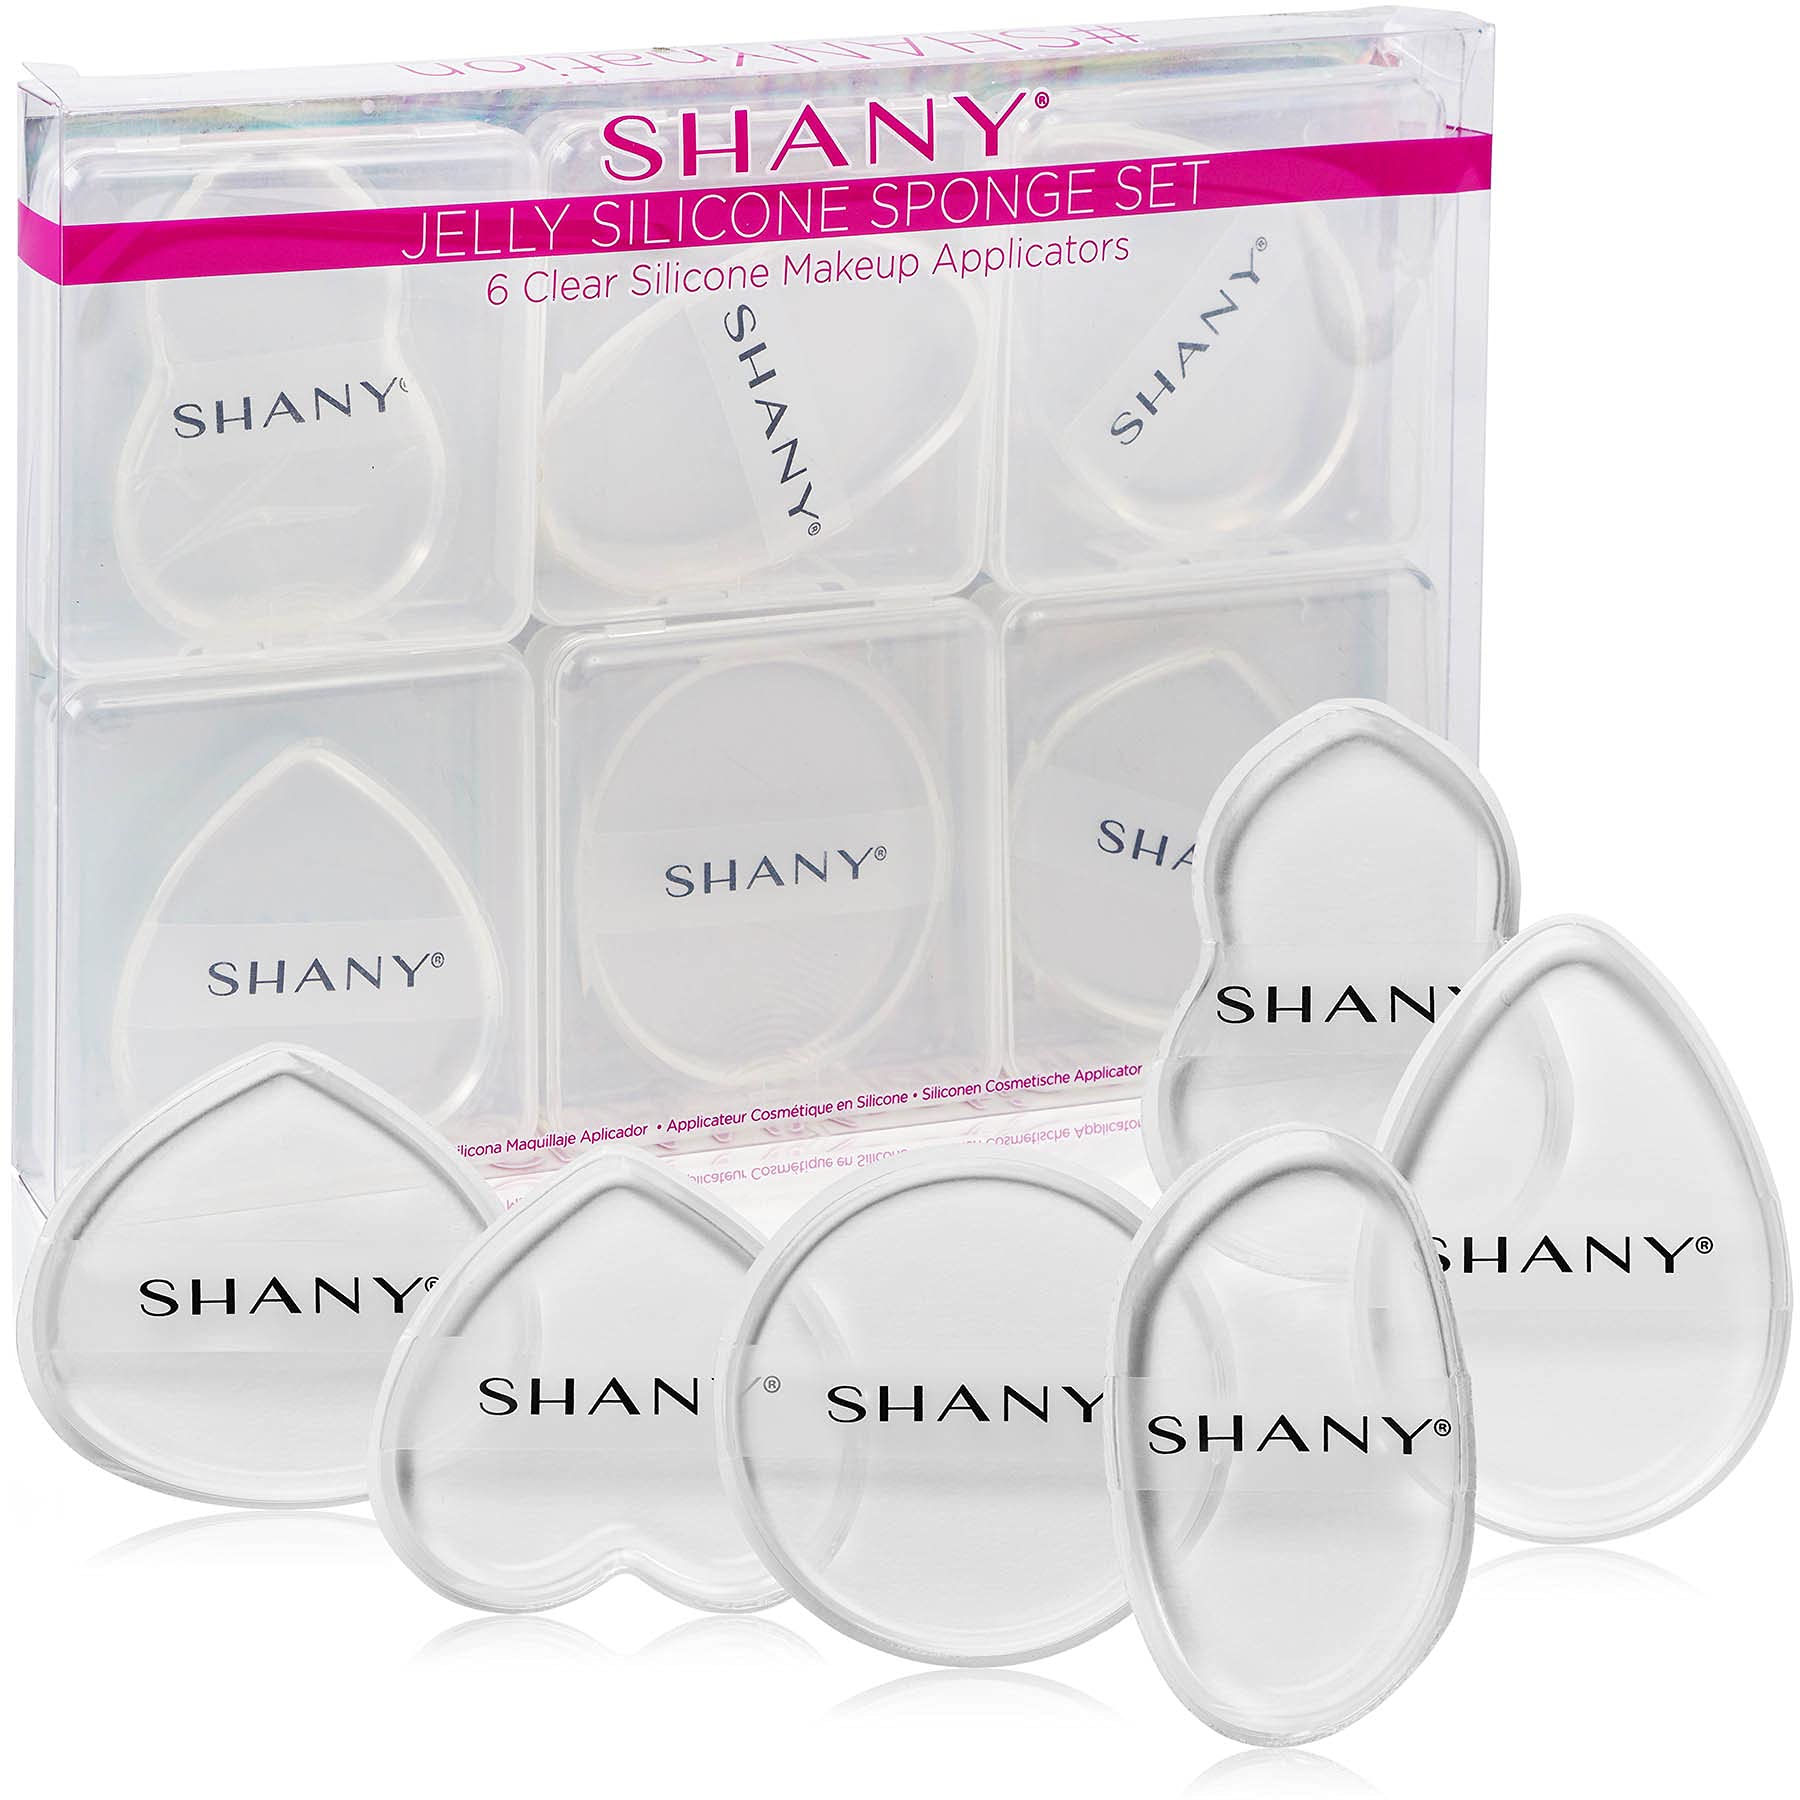 SHANY Stay Jelly Silicone Sponge Set - Clear & Non-Absorbent Makeup Blending Sponges for Flawless Application with Foundation - Assorted Sizes and Shapes - Pack of 6